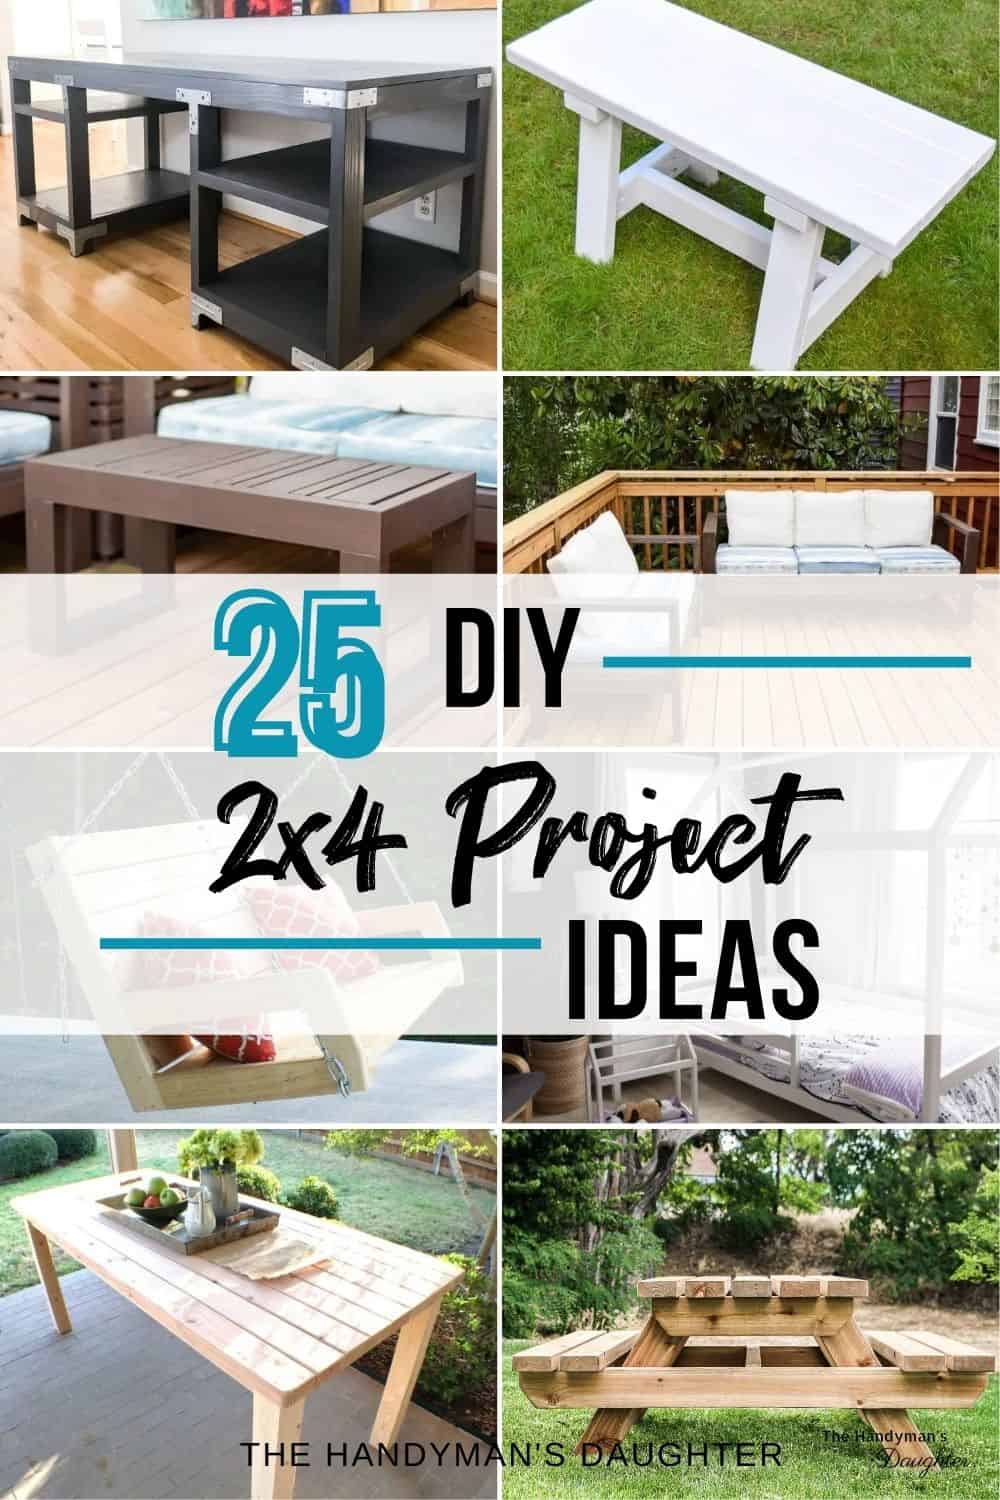 DIY 2x4 Project Ideas collage